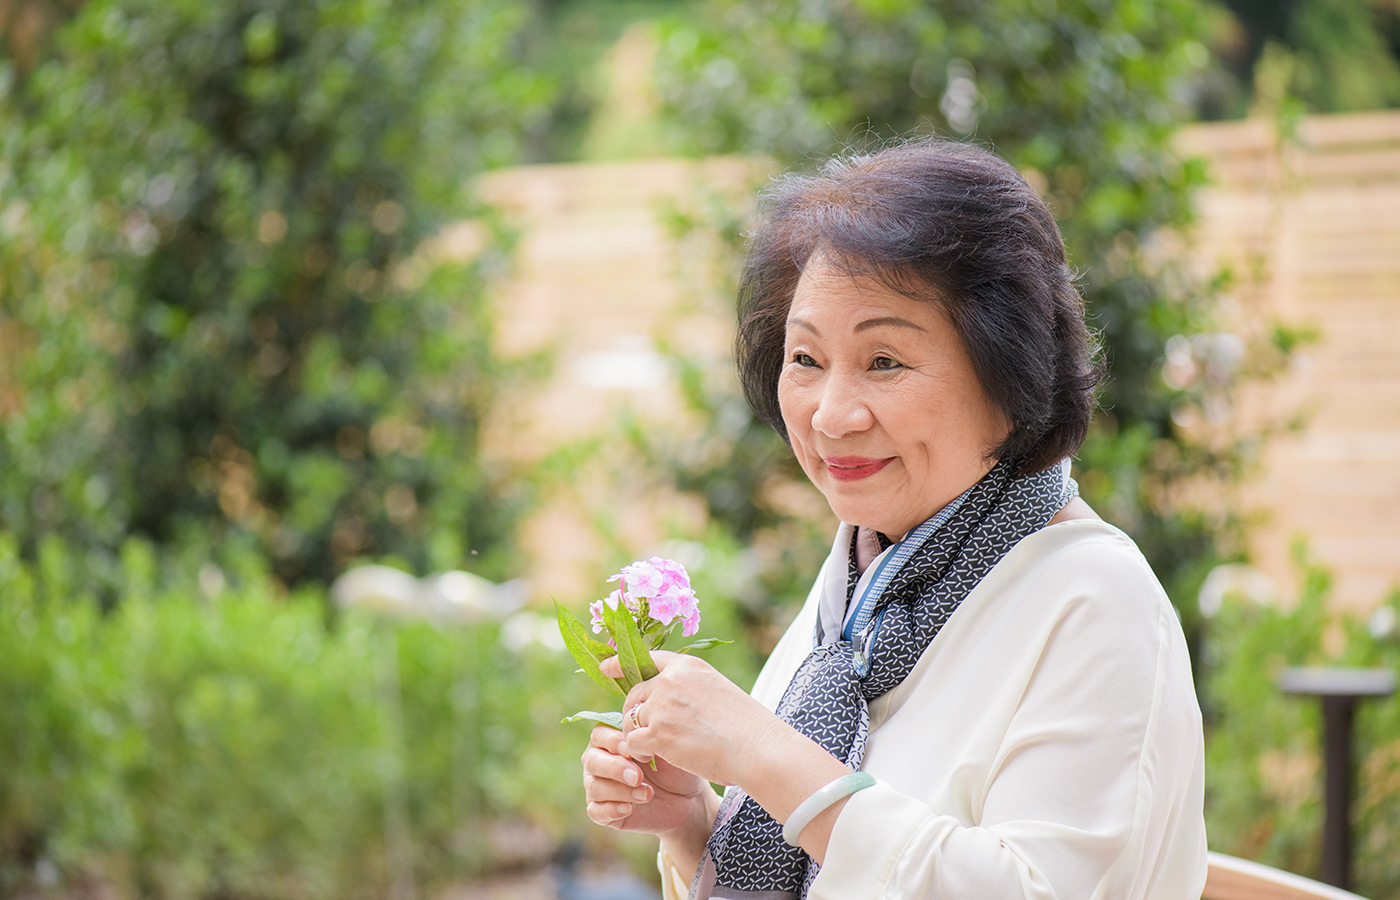 A resident is holding flowers outside.